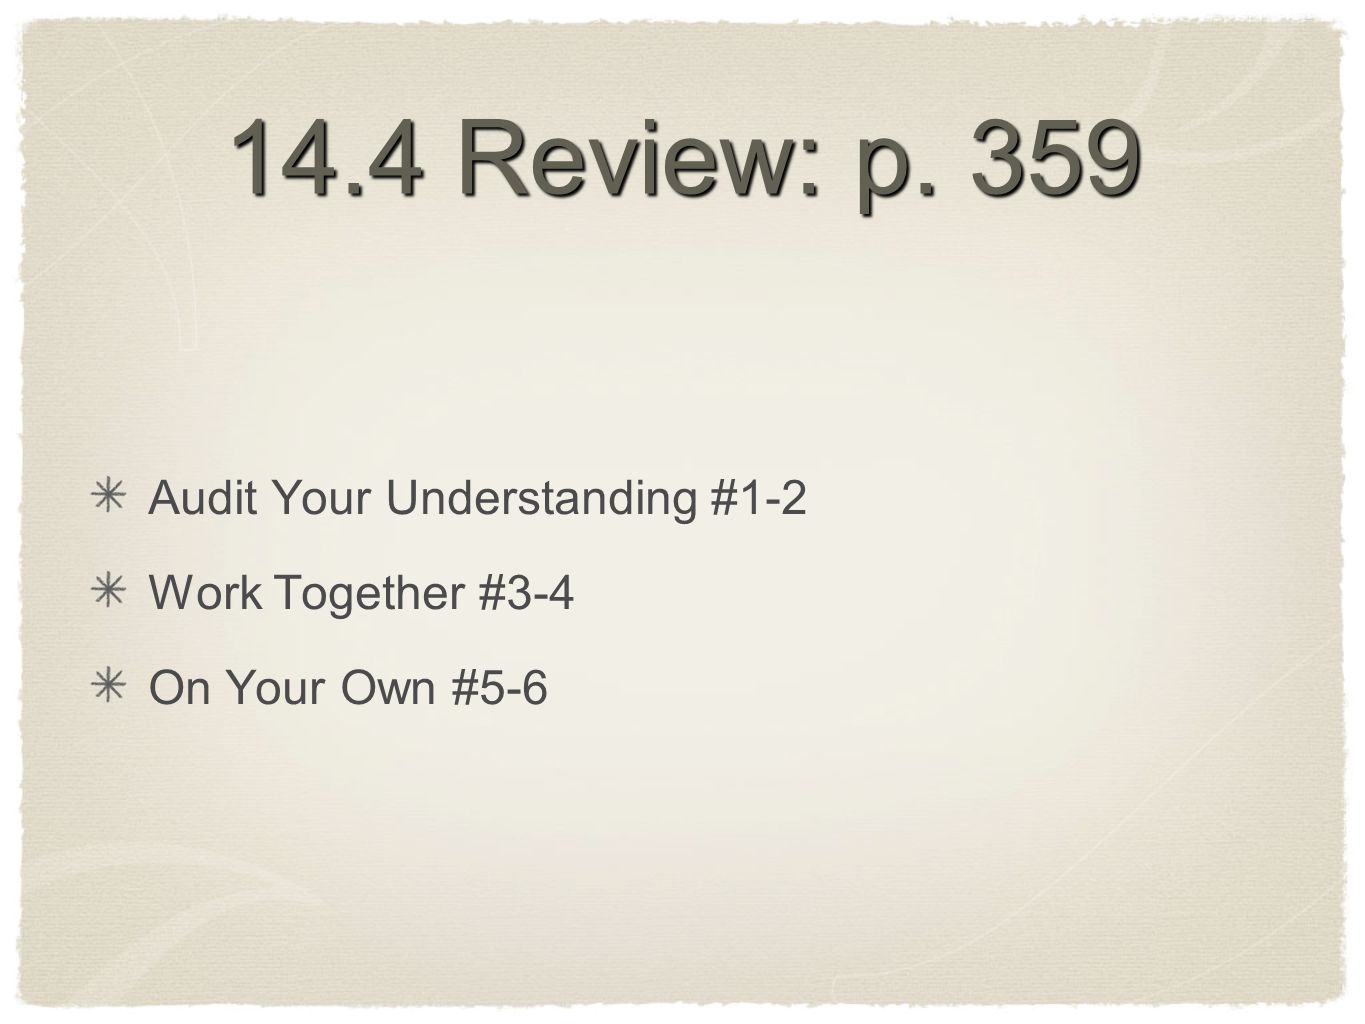 14.4 Review: p. 359 Audit Your Understanding #1-2 Work Together #3-4